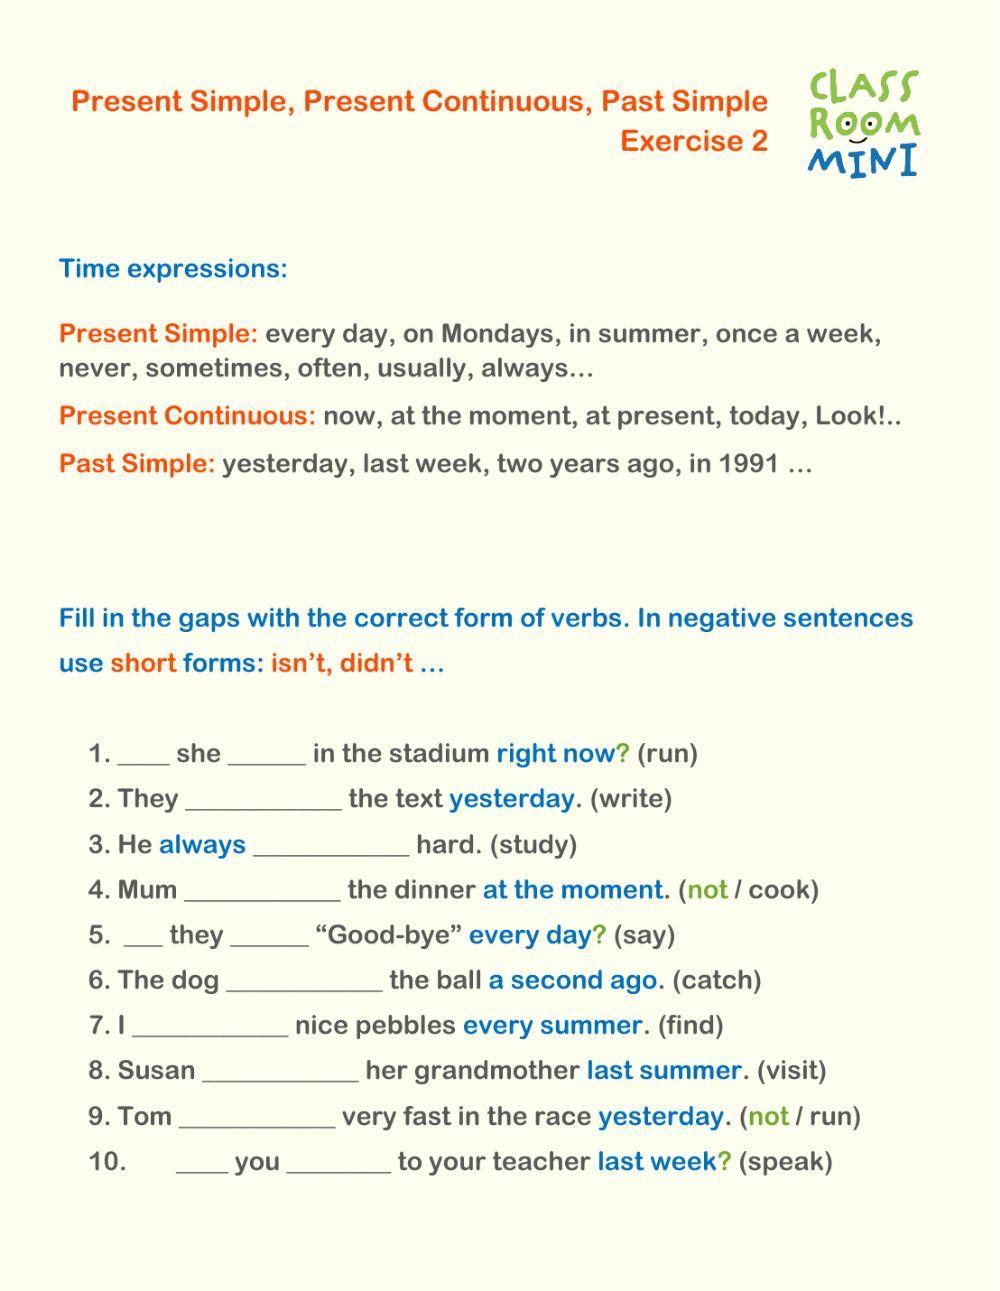 Present Simple, Present Continuous, Past Simple. Exercise 2